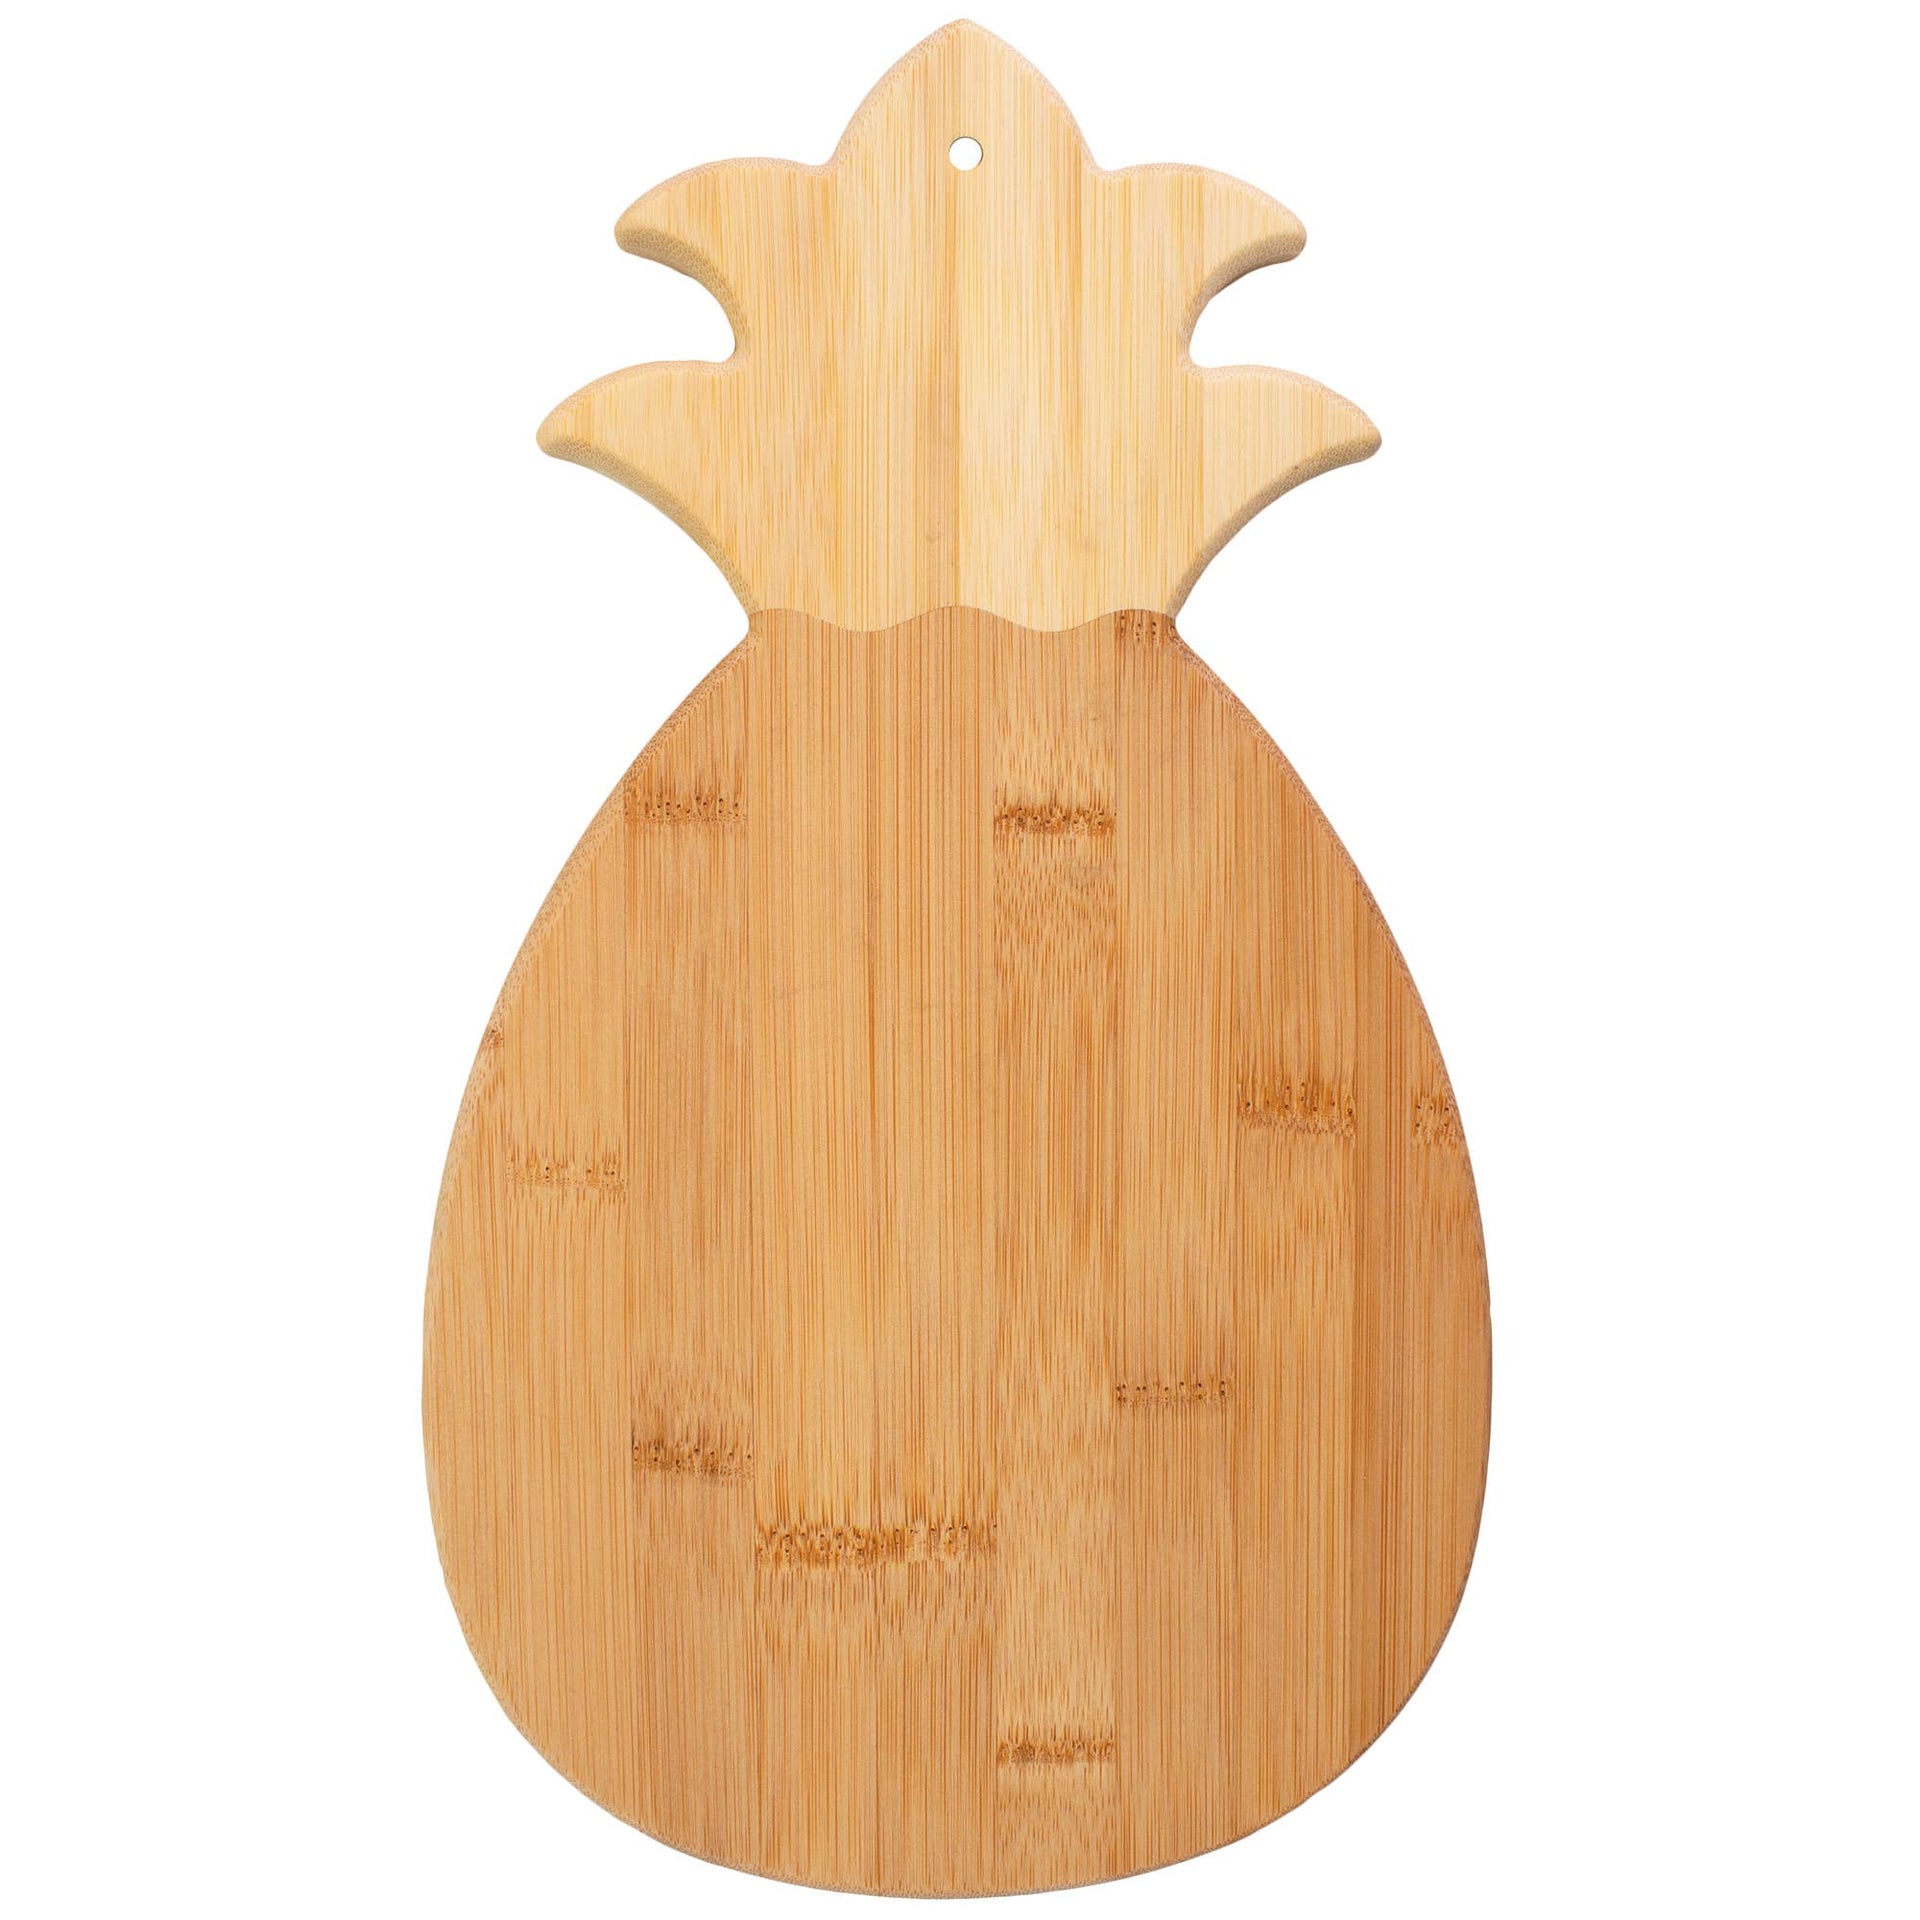 Totally Bamboo Cutting Boards Totally Bamboo - Pineapple Shaped Serving & Cutting Board